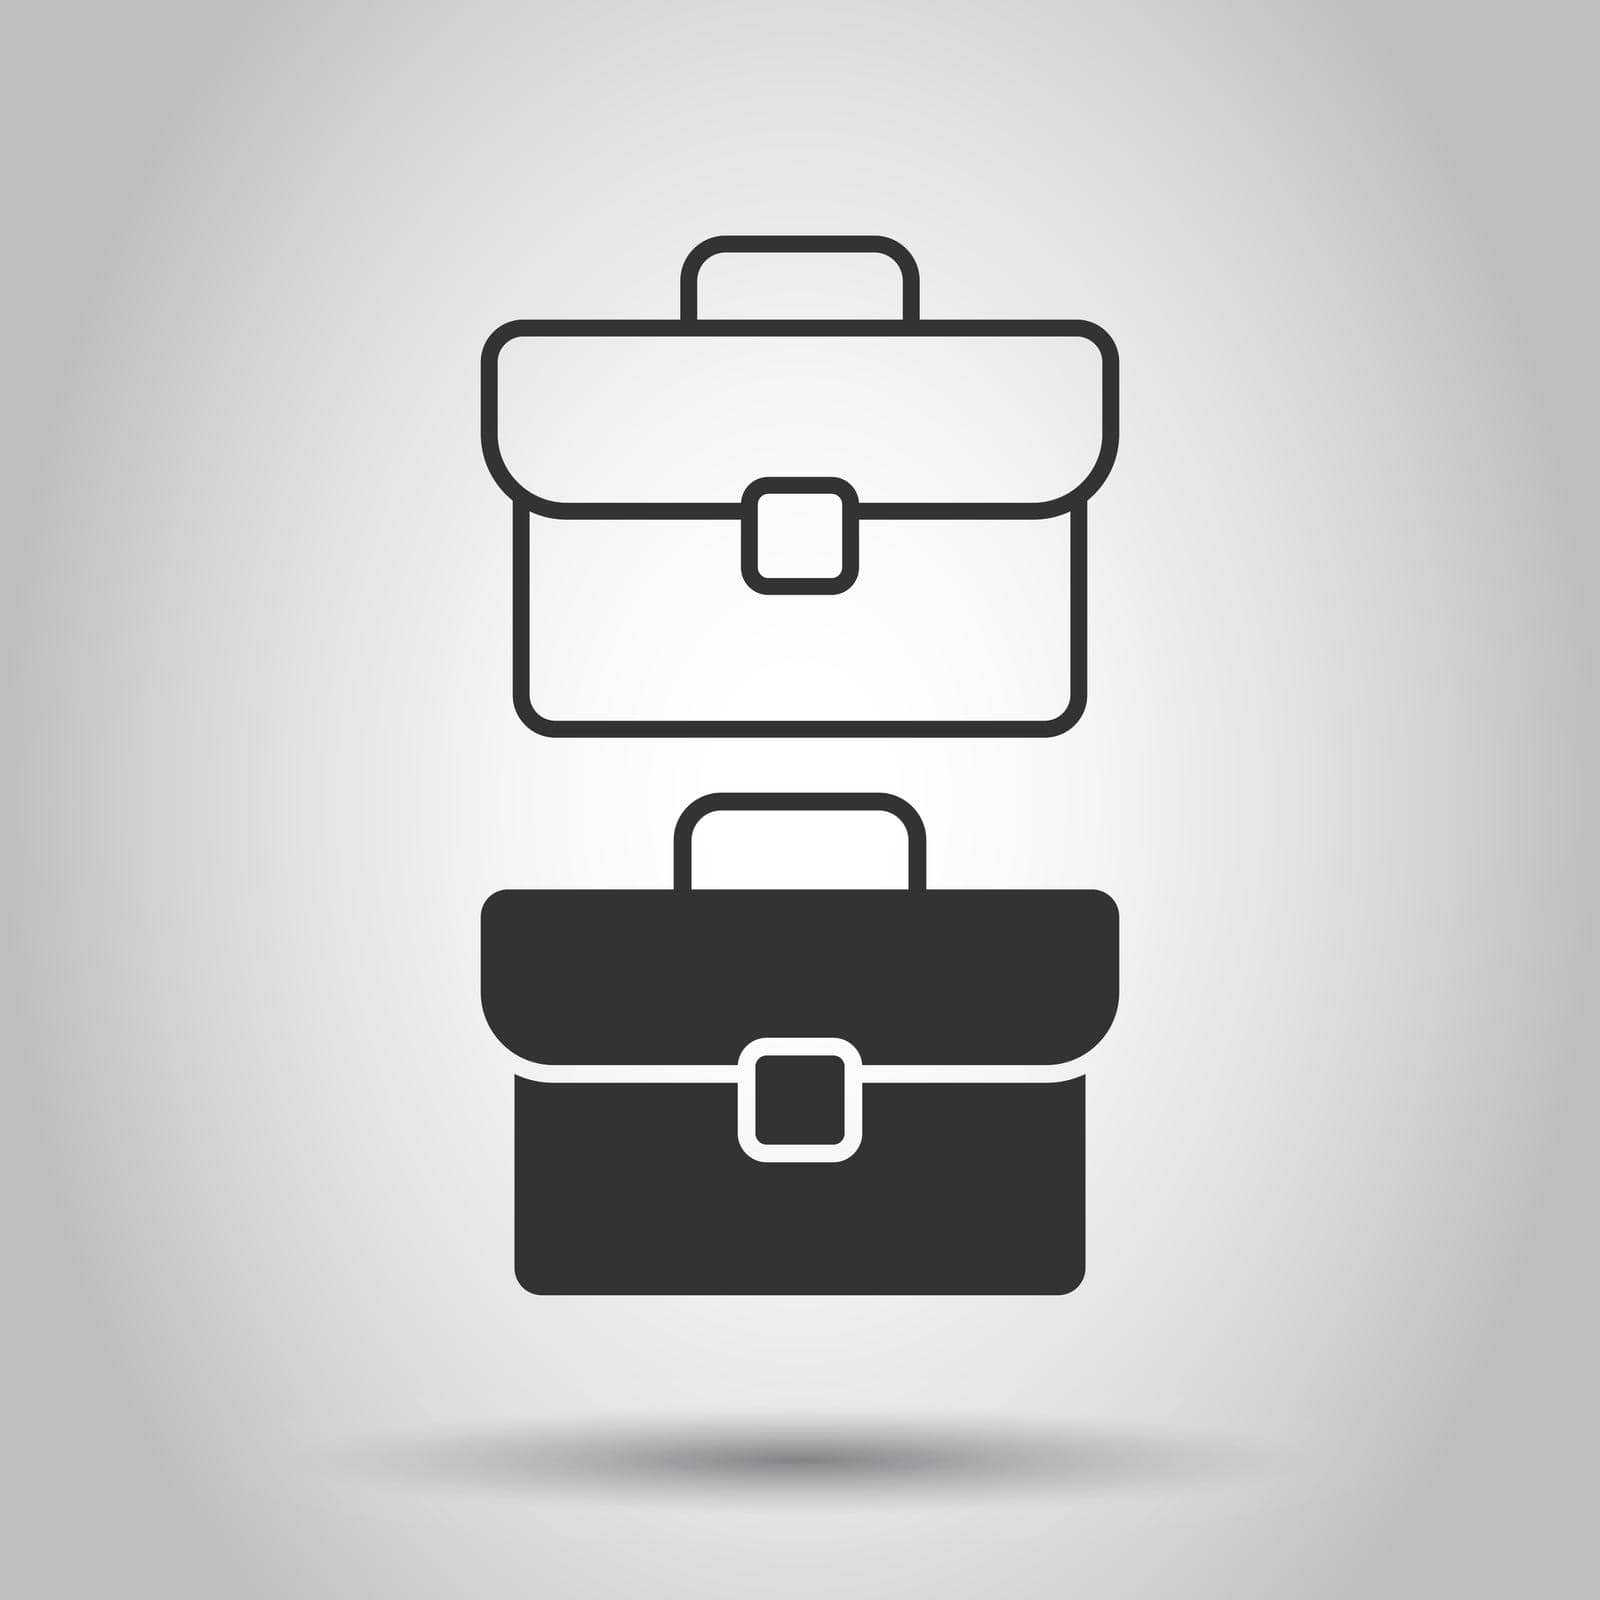 Briefcase icon in flat style. Businessman bag vector illustration on white isolated background. Portfolio business concept. by LysenkoA